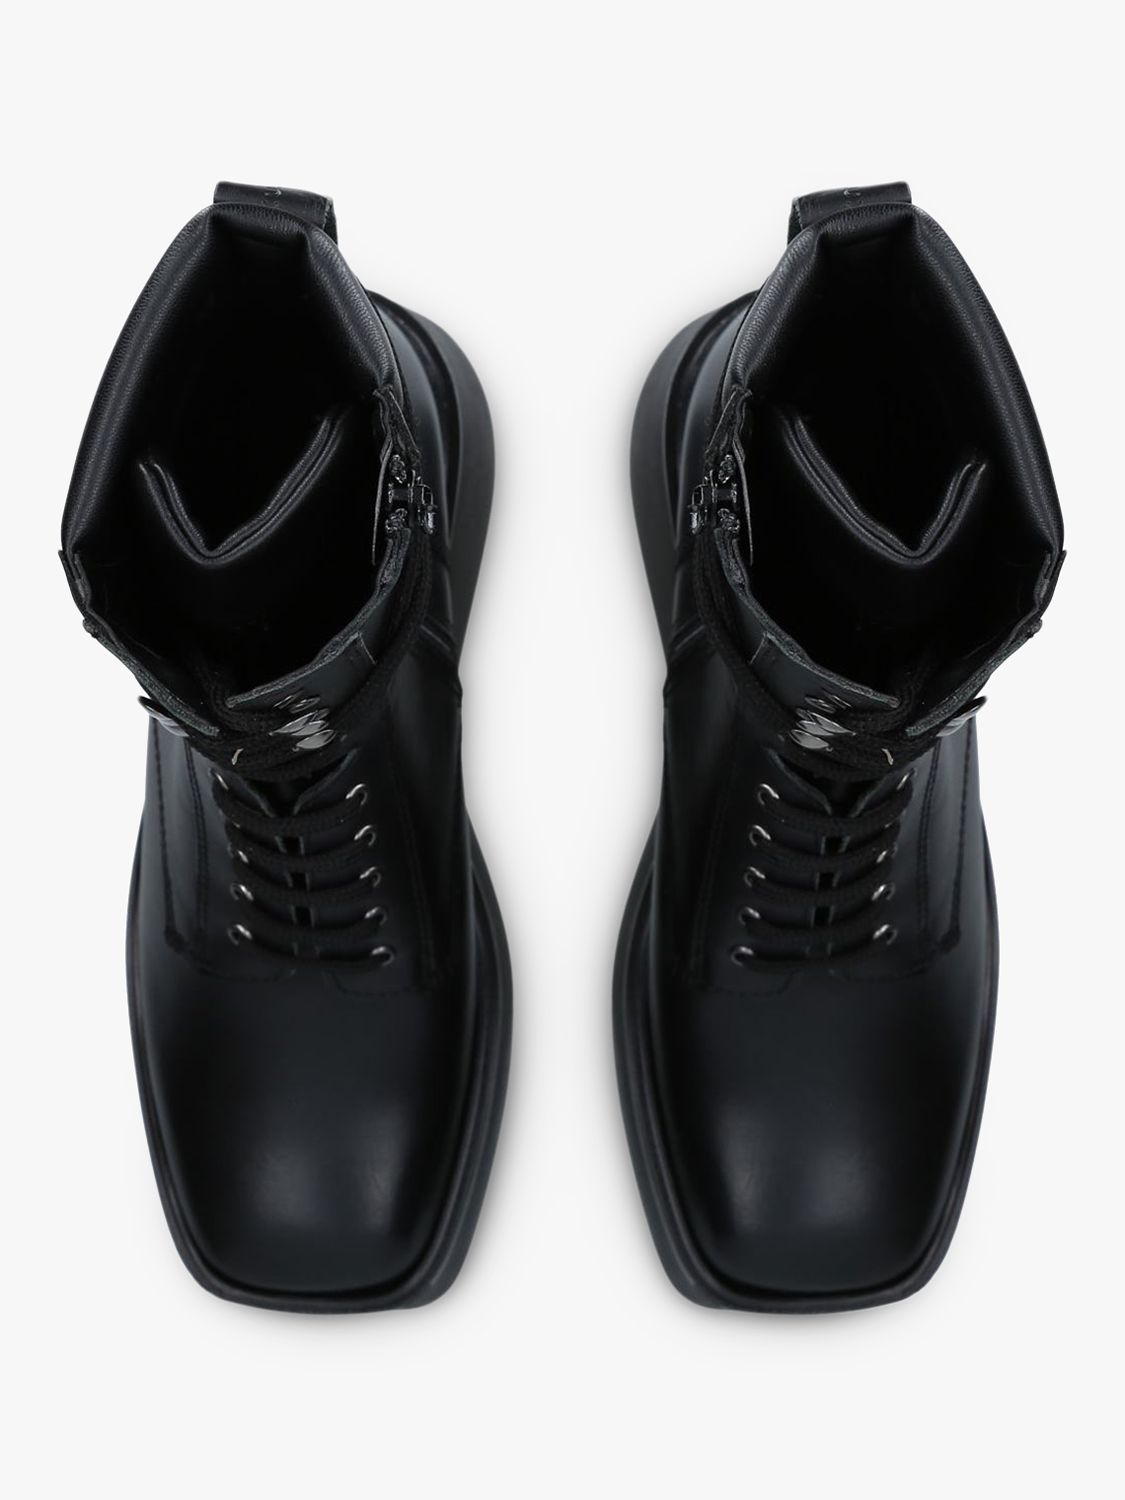 Kurt Geiger London Stately Leather Lace Up Boots, Black at John Lewis ...